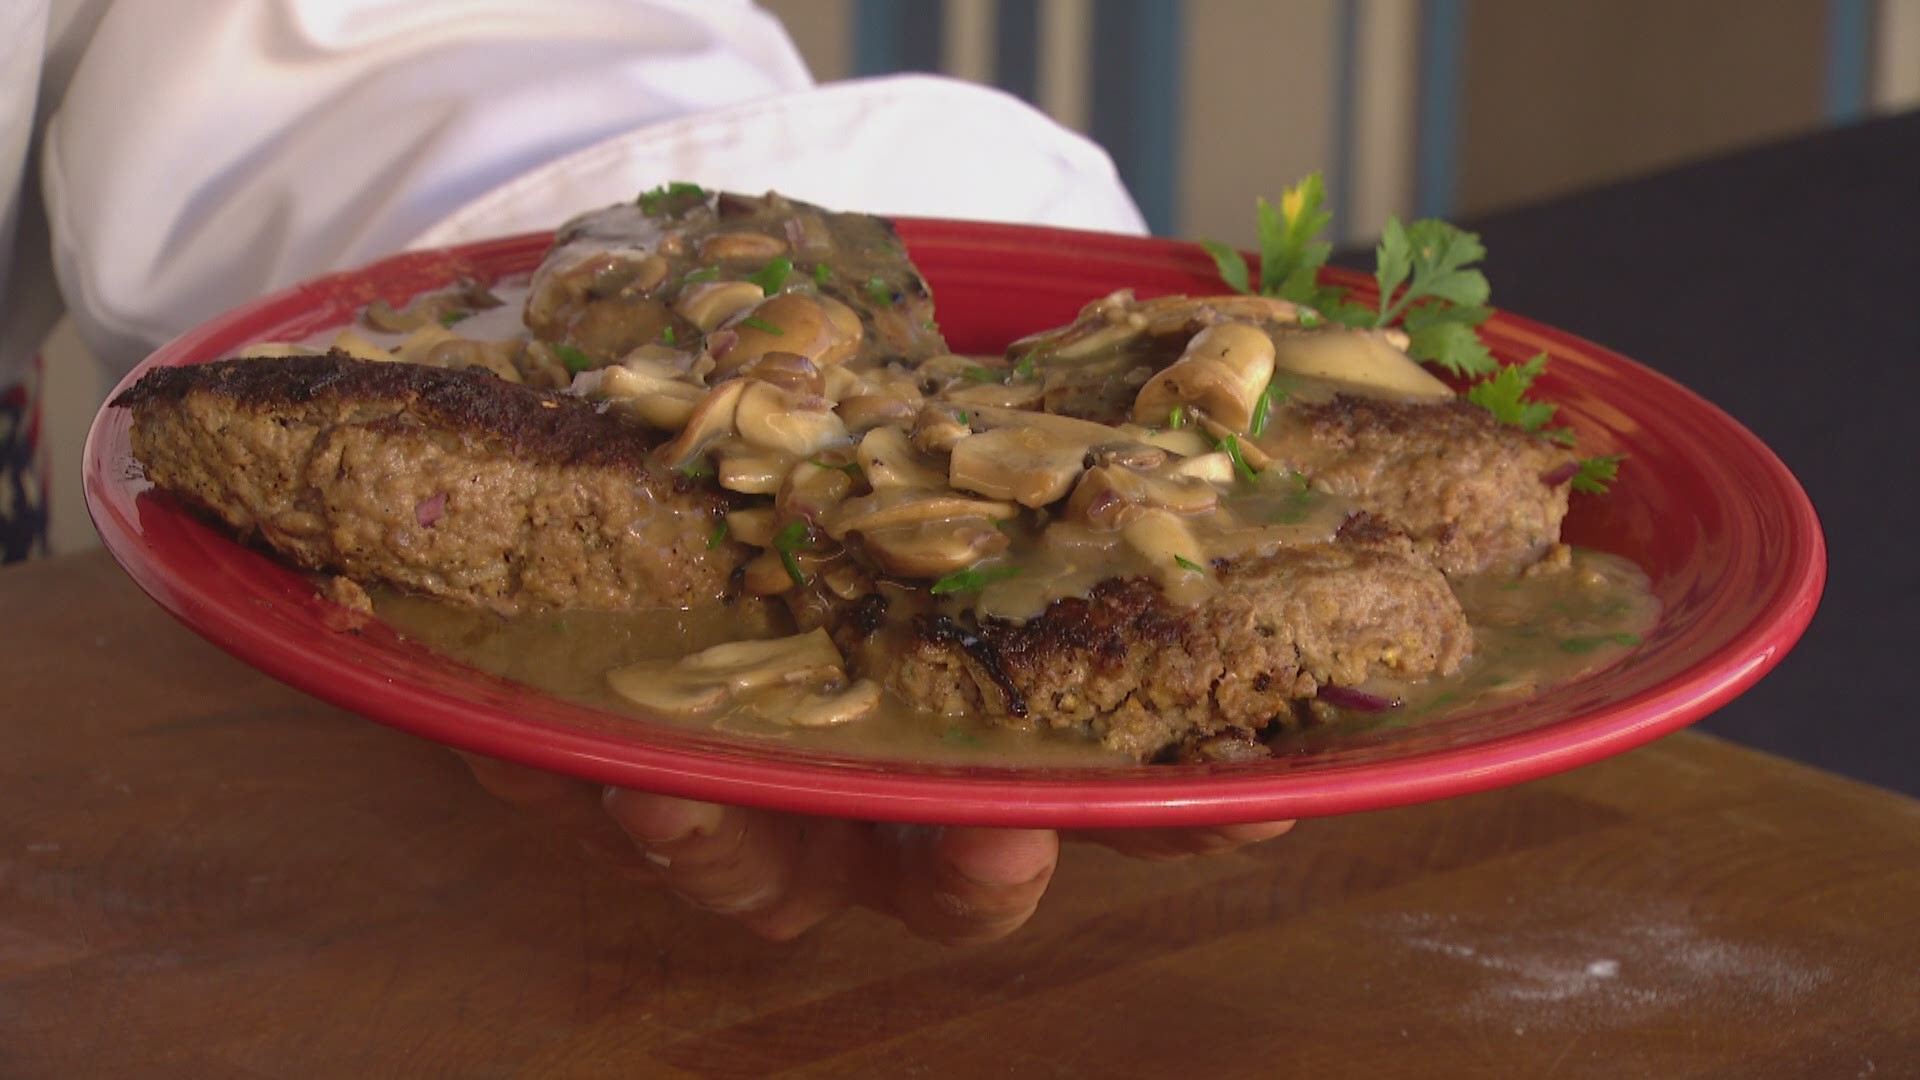 My mom and dad were great cooks, but we didn't always have the budget to eat steak all the time. So, to satisfy our hunger salisbury steak was the solution.